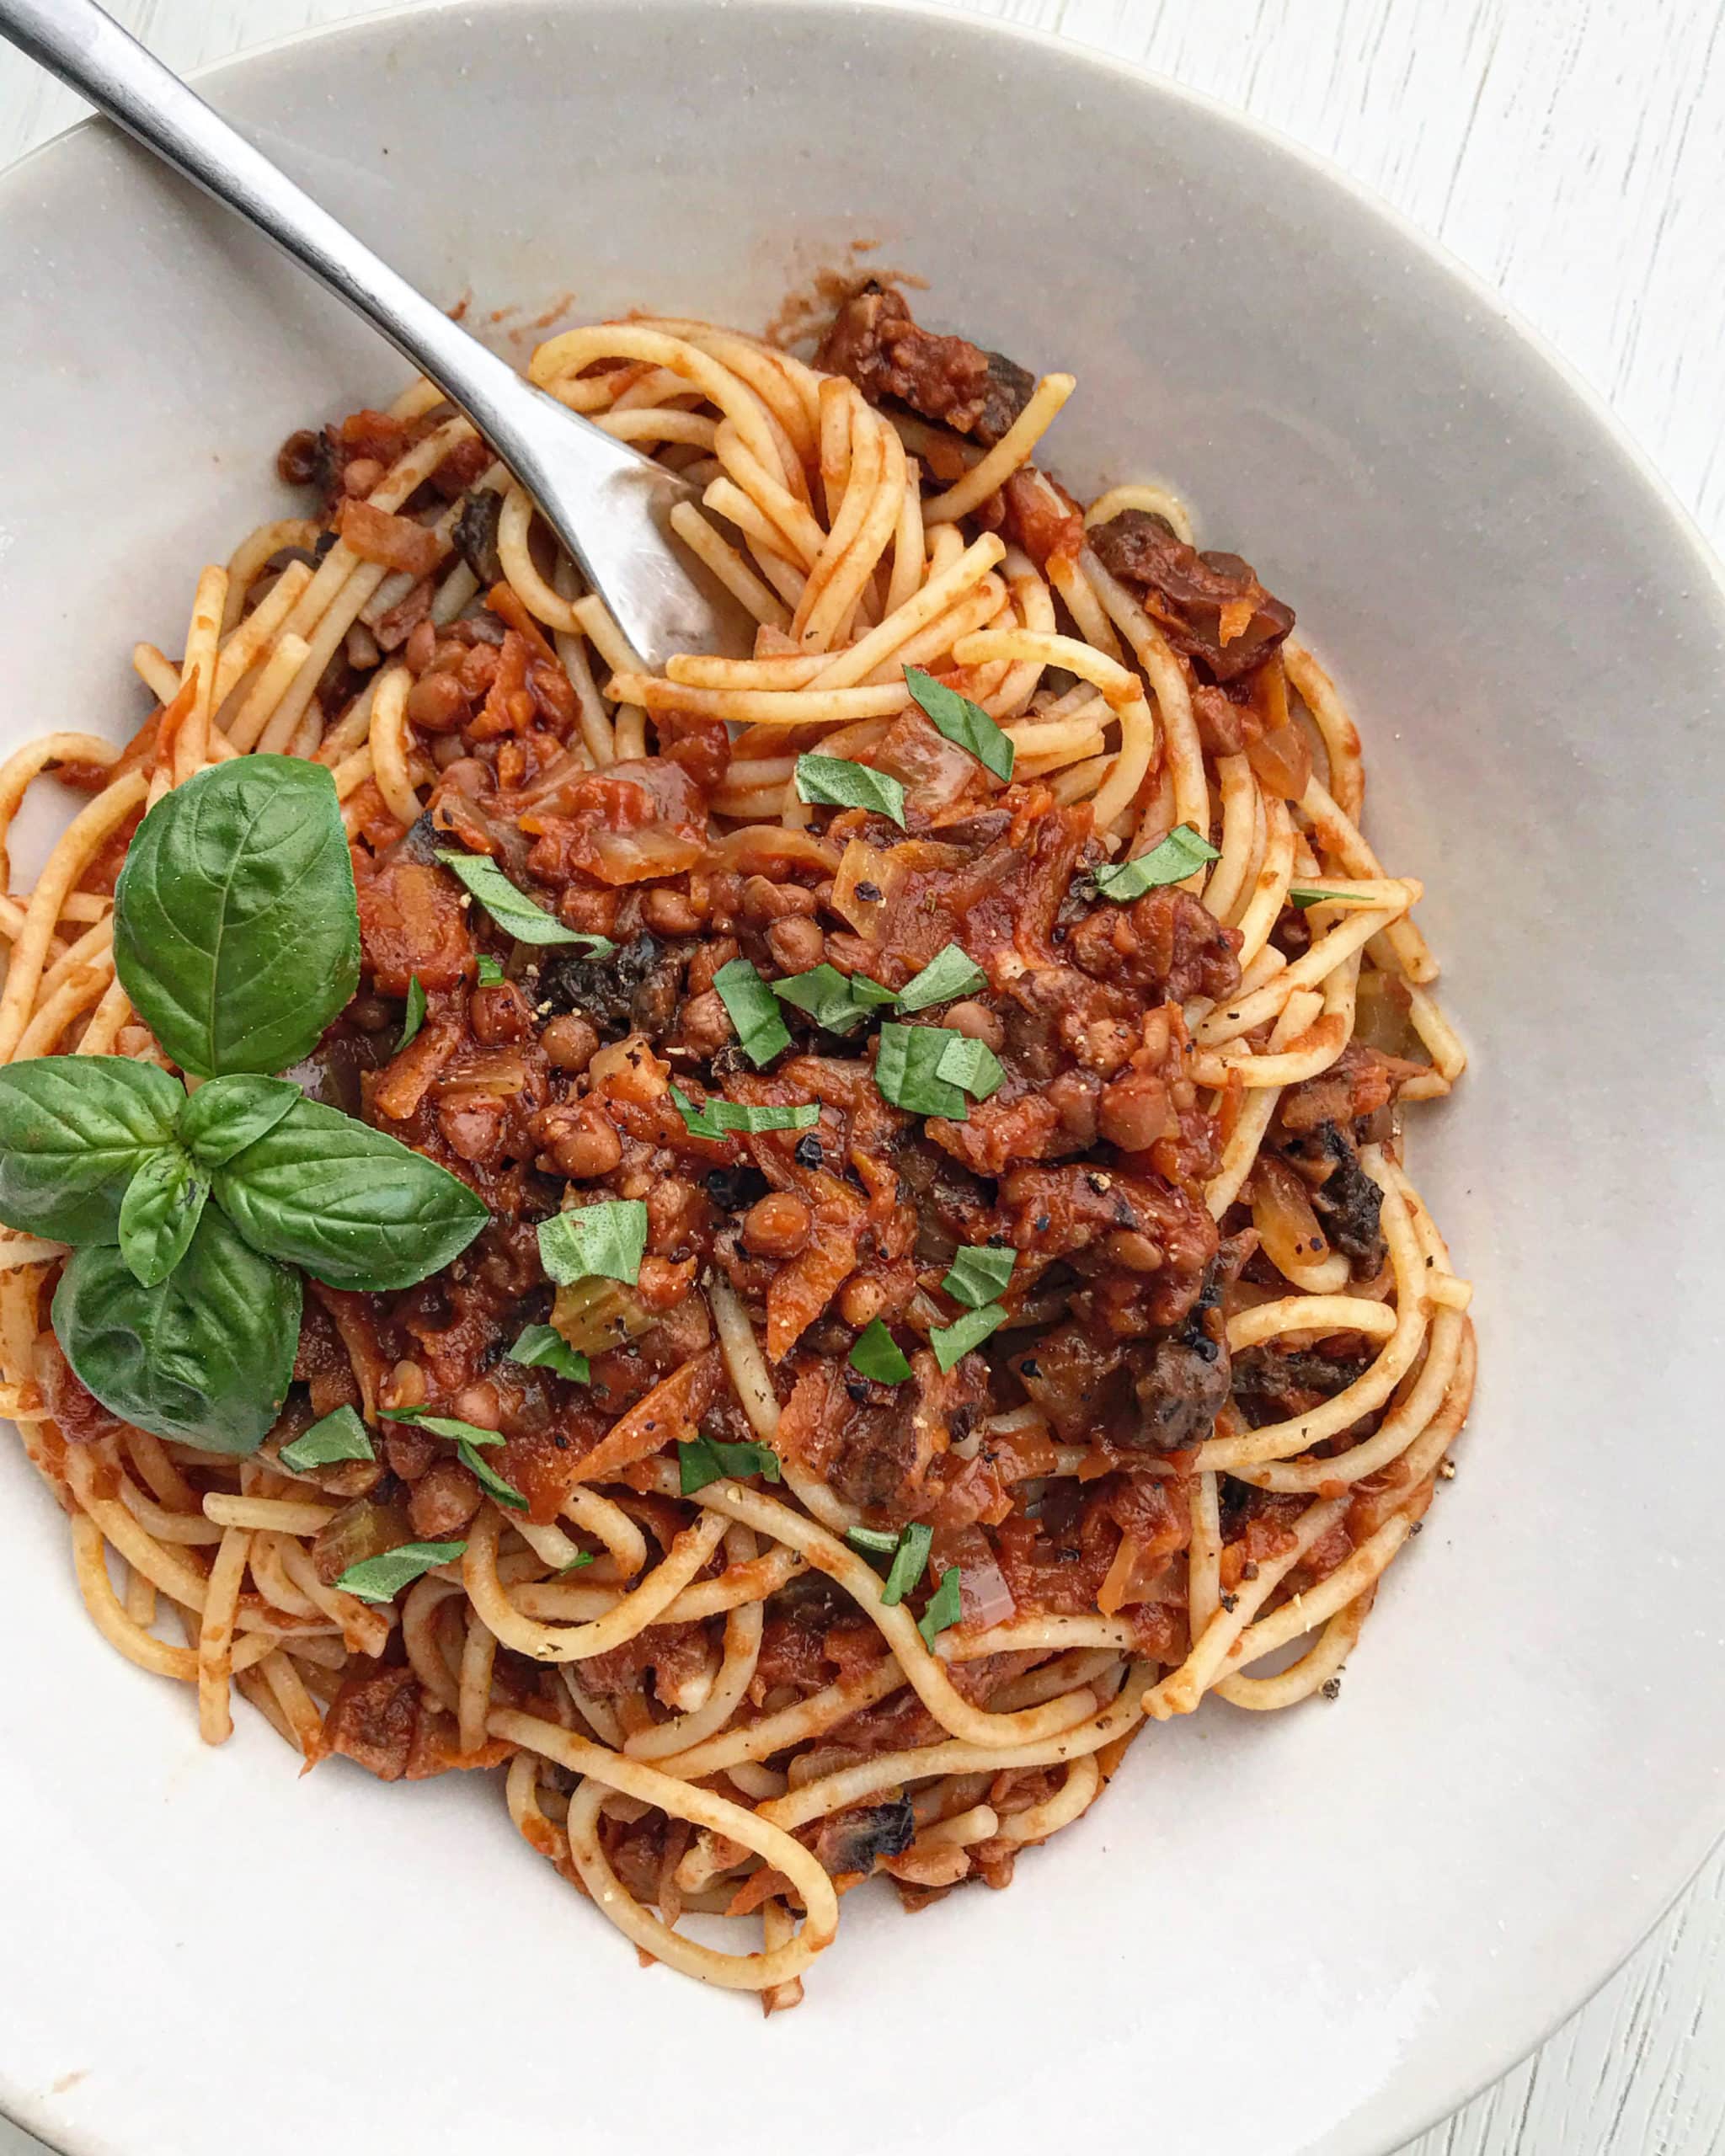 A bowl of vegan bolognese sauce on spaghetti pasta with chopped basil over top